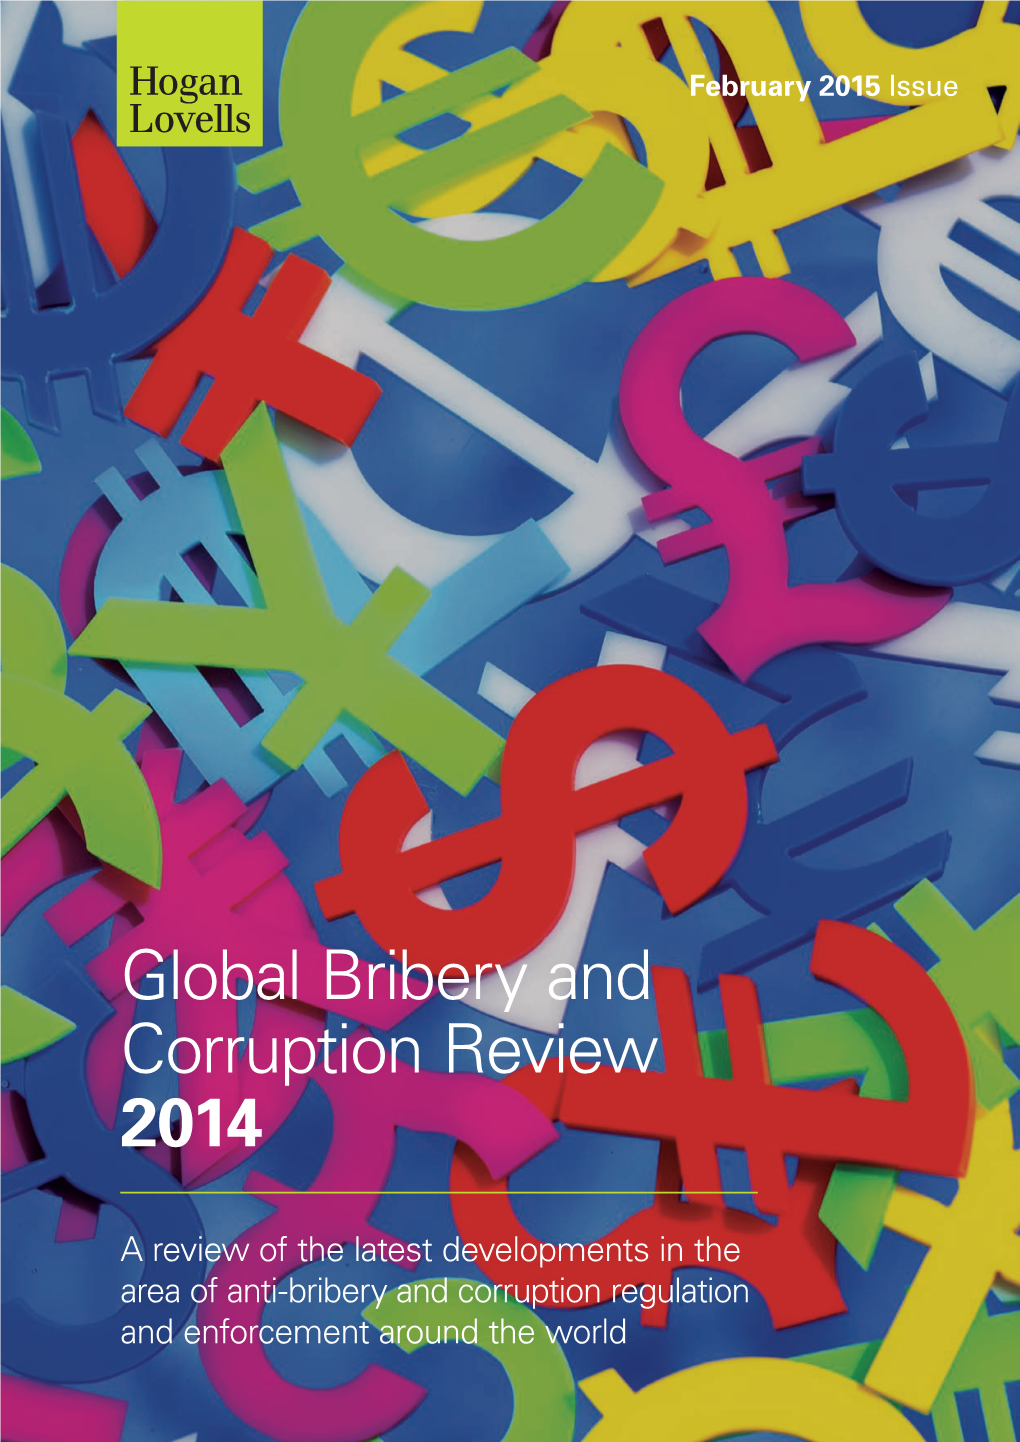 Global Bribery and Corruption Review 2014